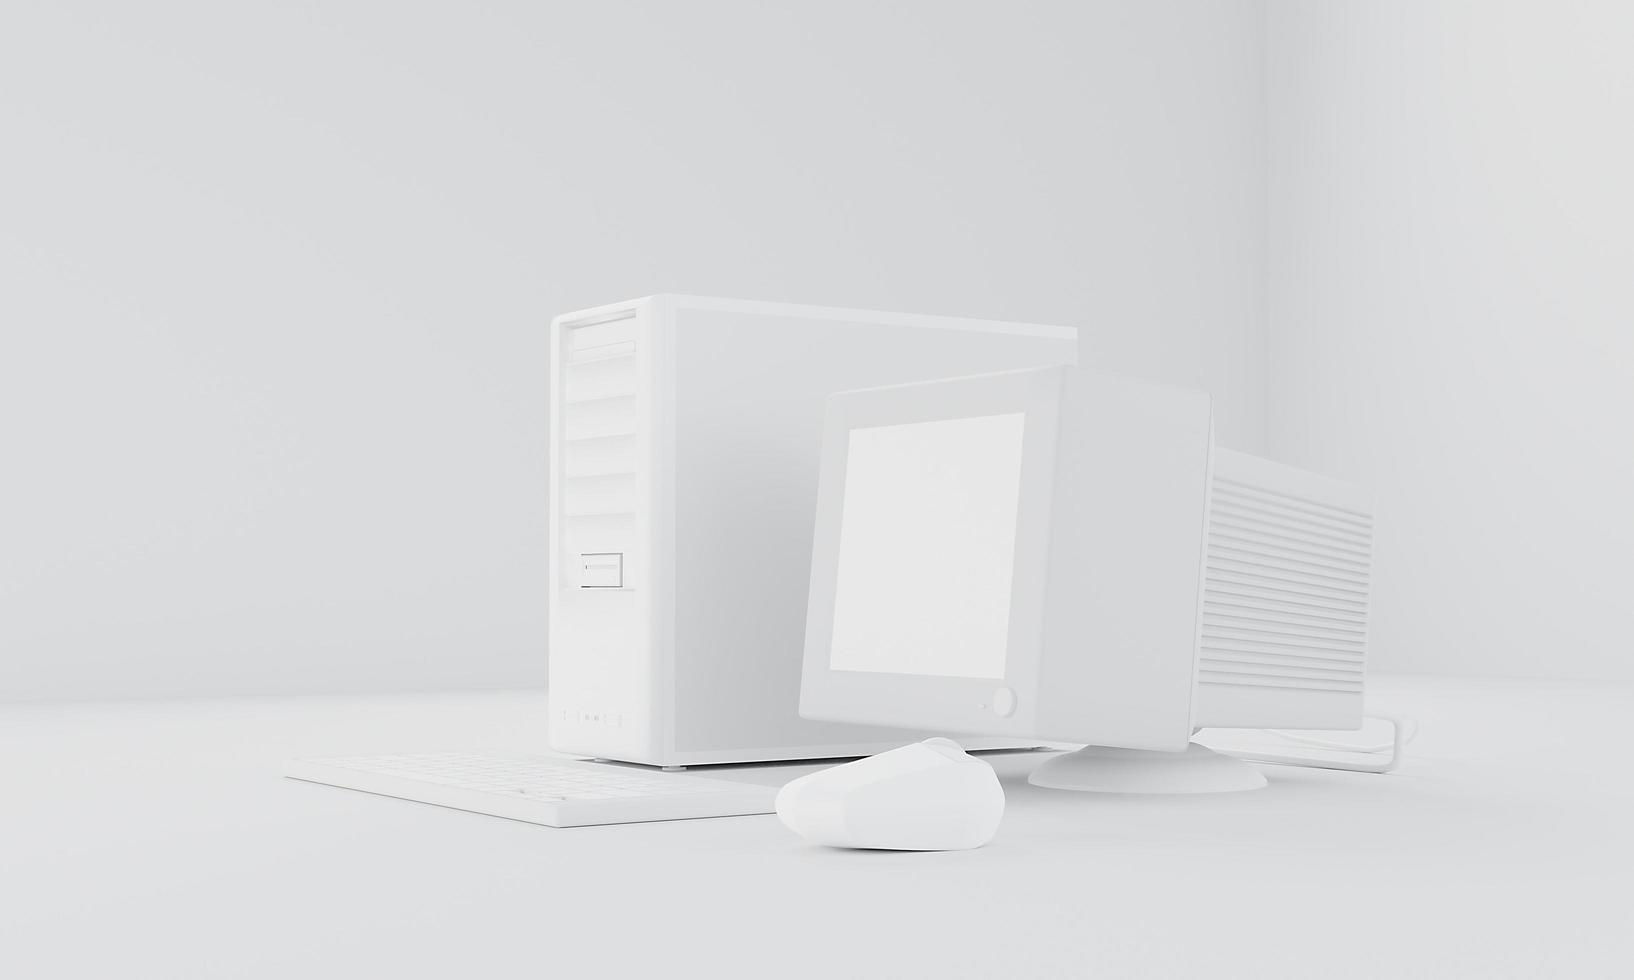 3D rendering old computer standard workstation crt white screen atx case mouse keyboard wireless on white background photo